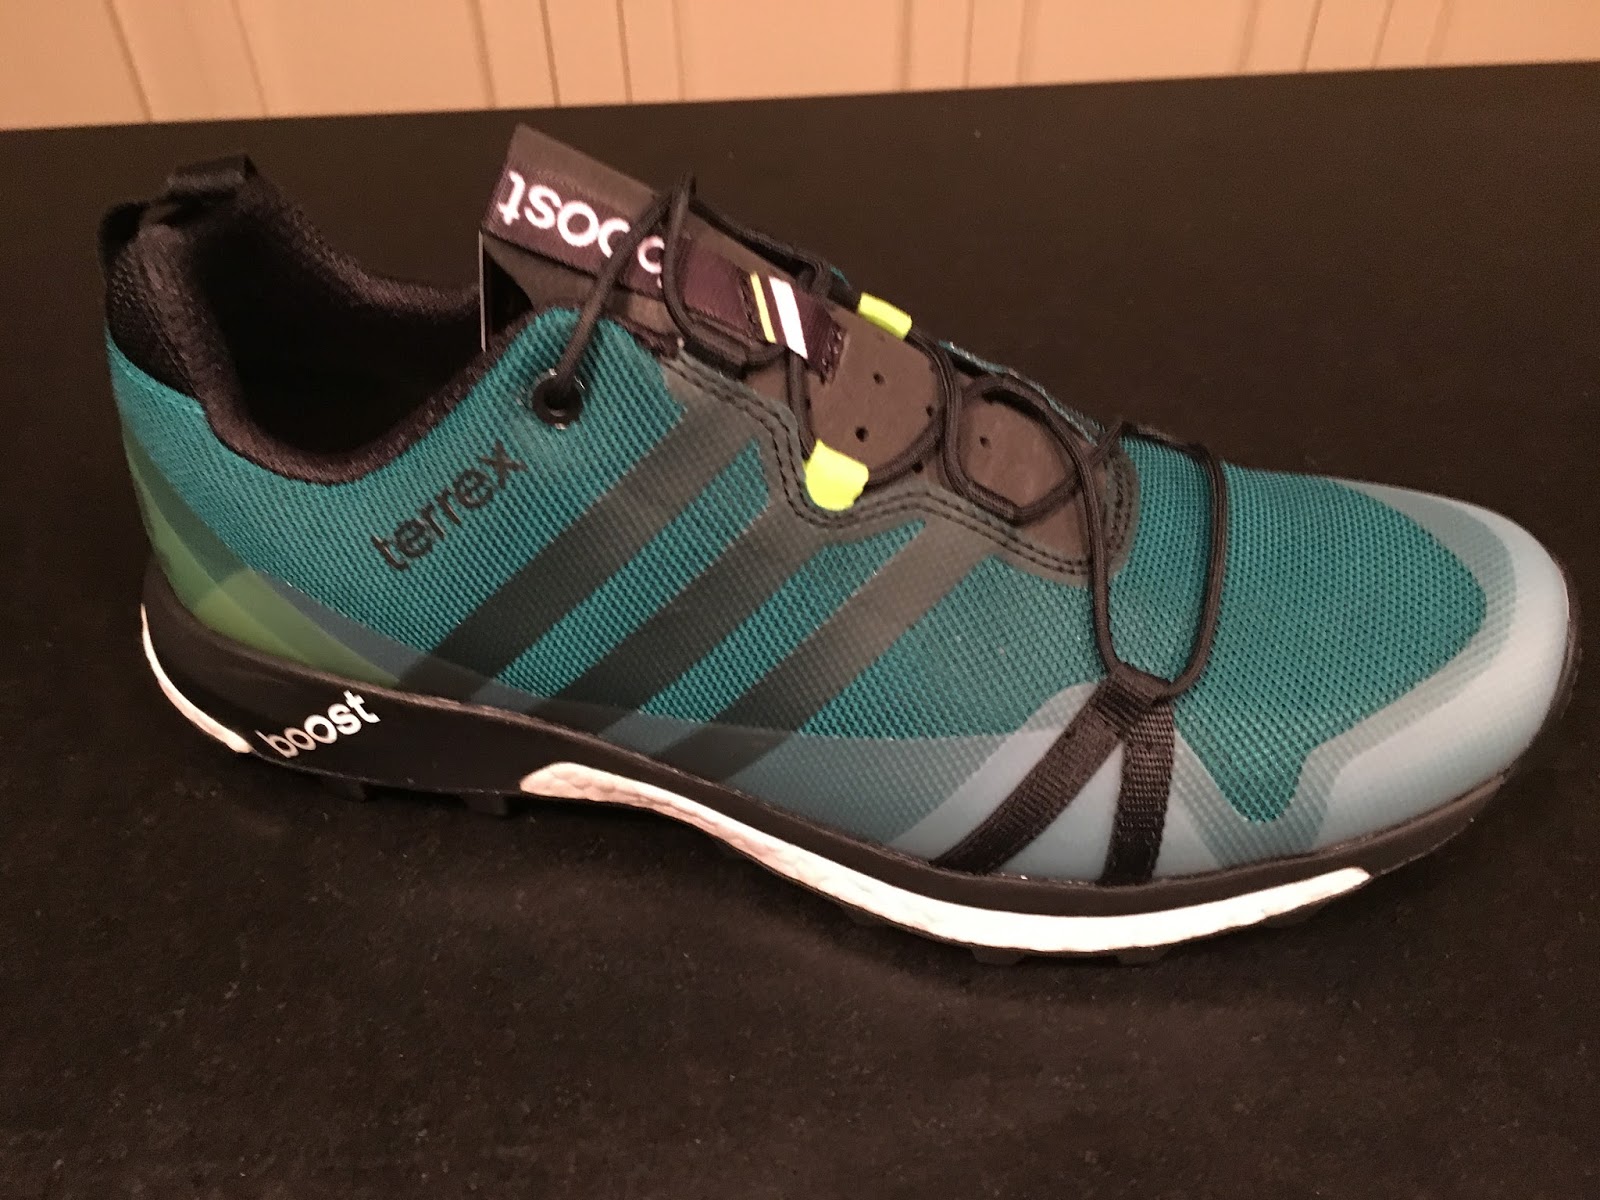 Conjugeren belasting deze Road Trail Run: adidas Outdoor Terrex Agravic and Agravic GTX – Extreme  grip and protection for just about any terrain.